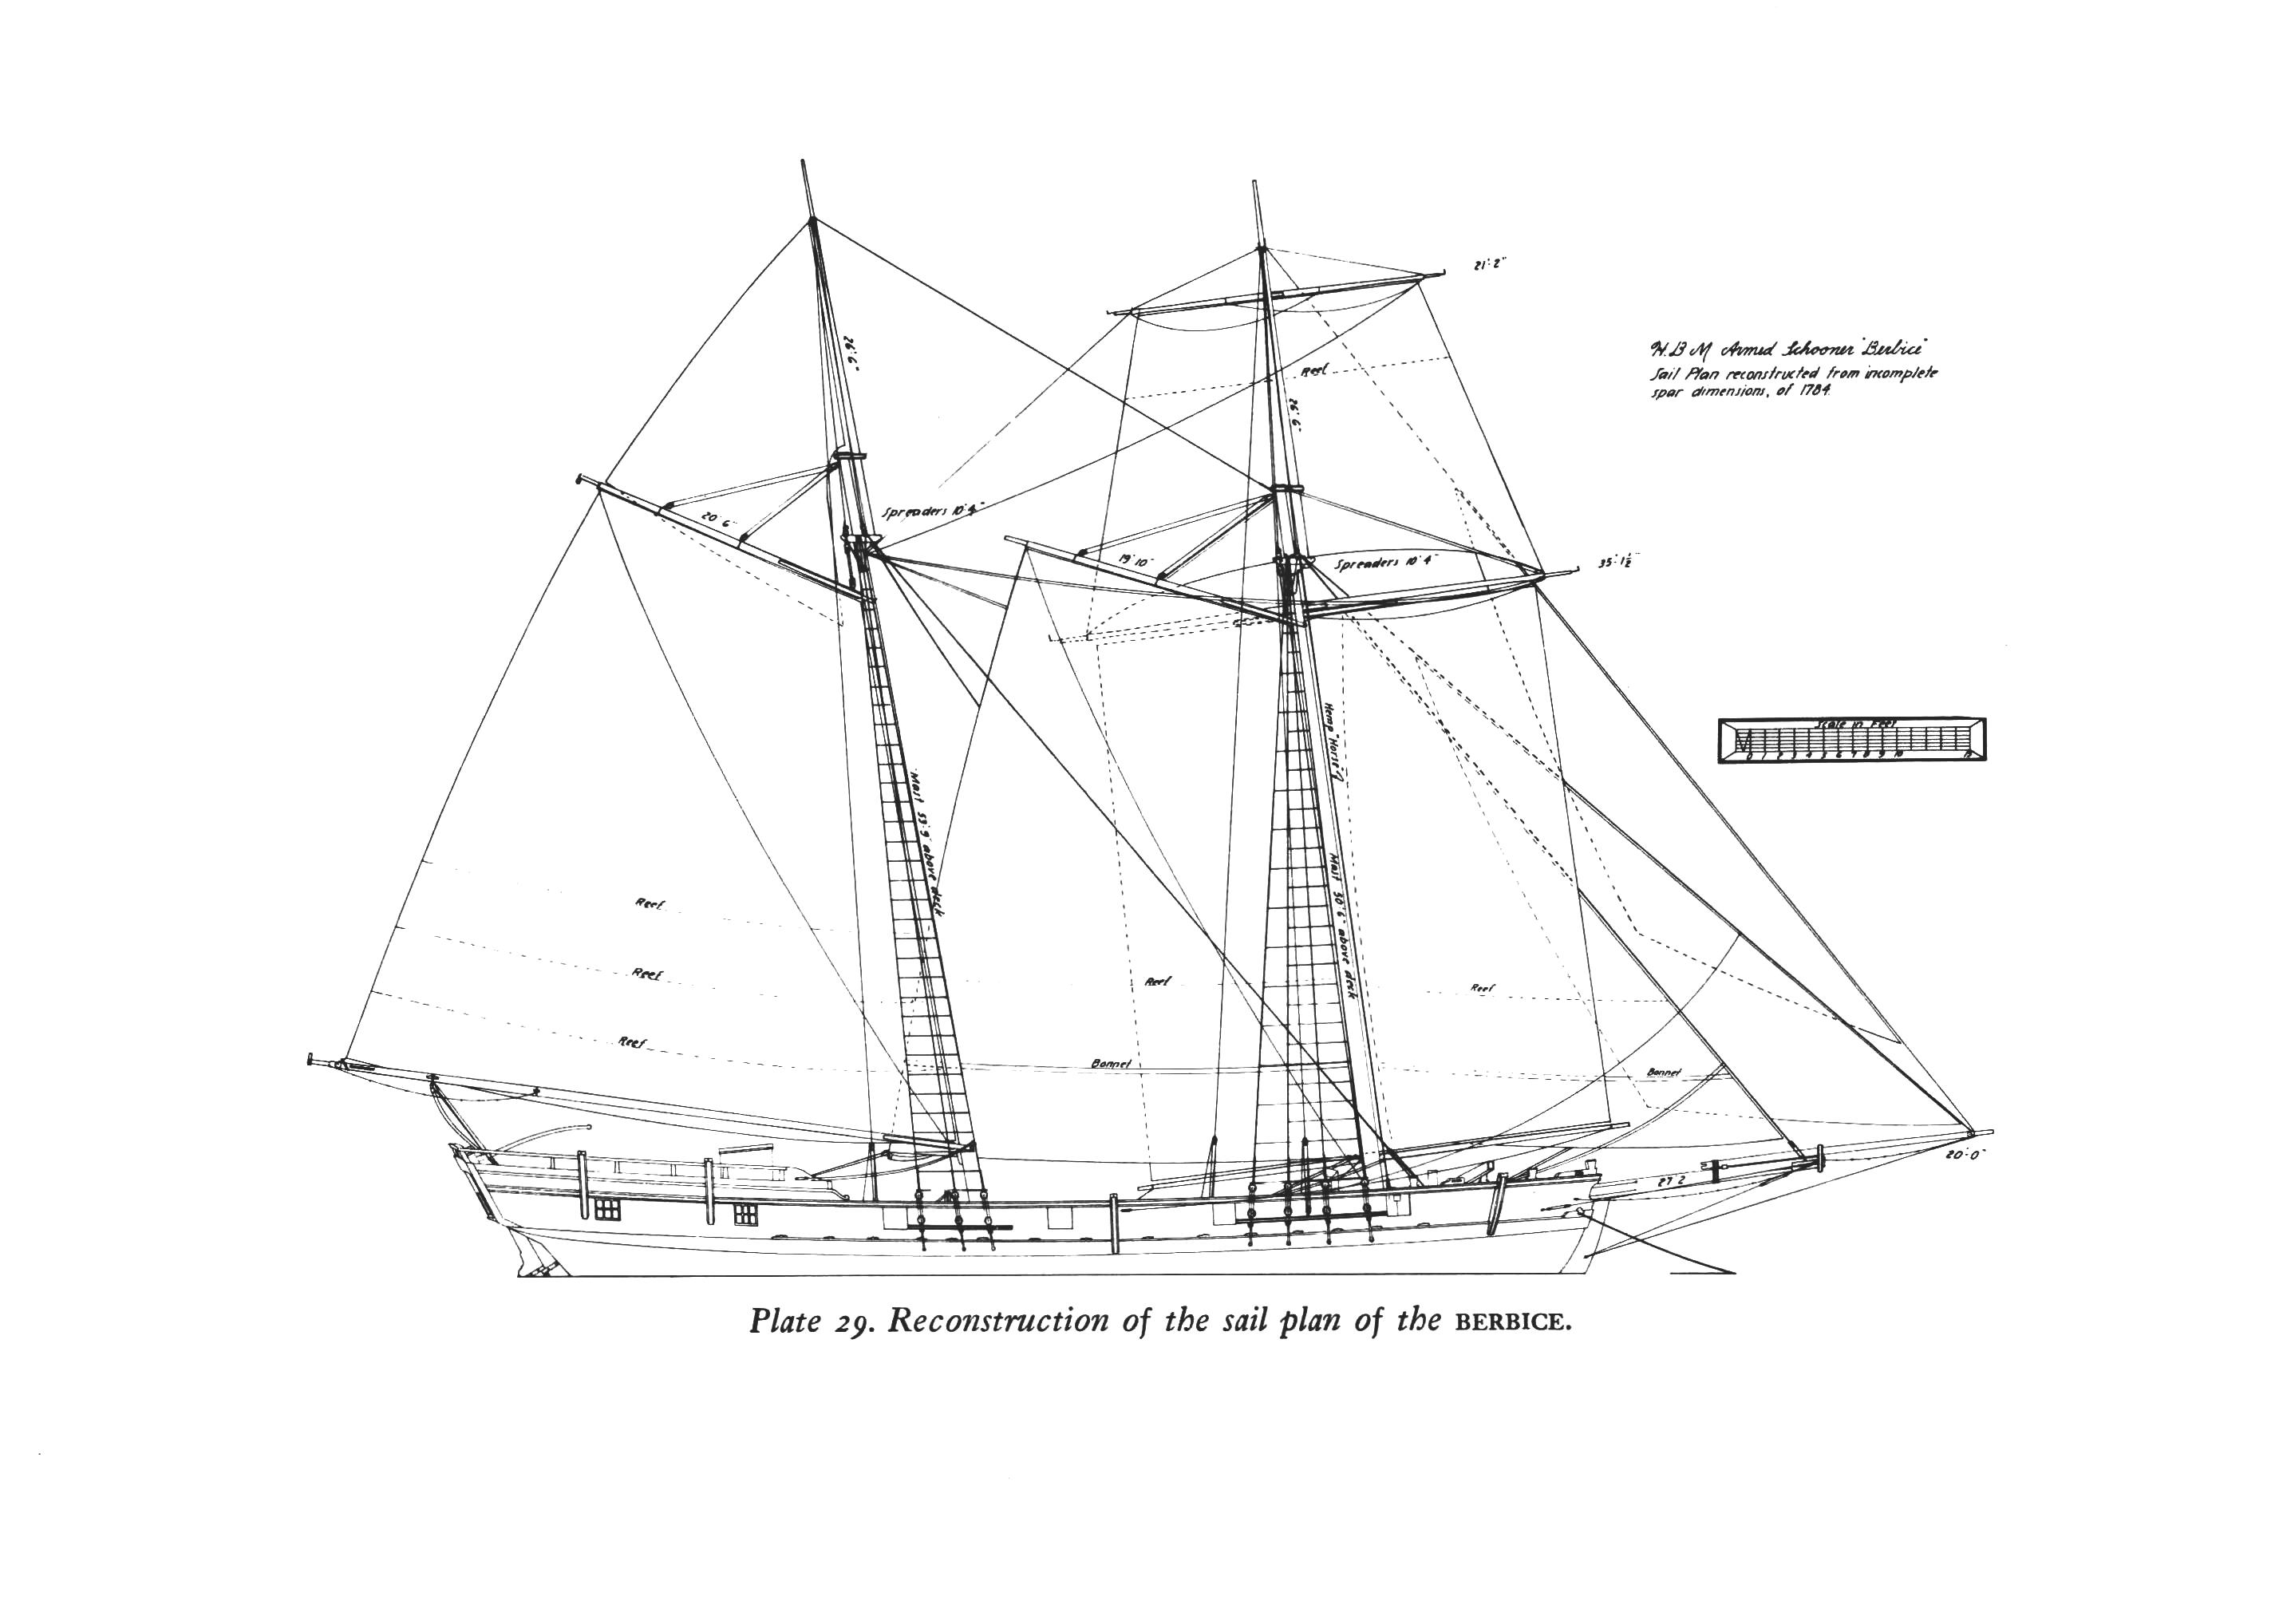 The search for speed under sail 1700-1855_ - 0149.jpg